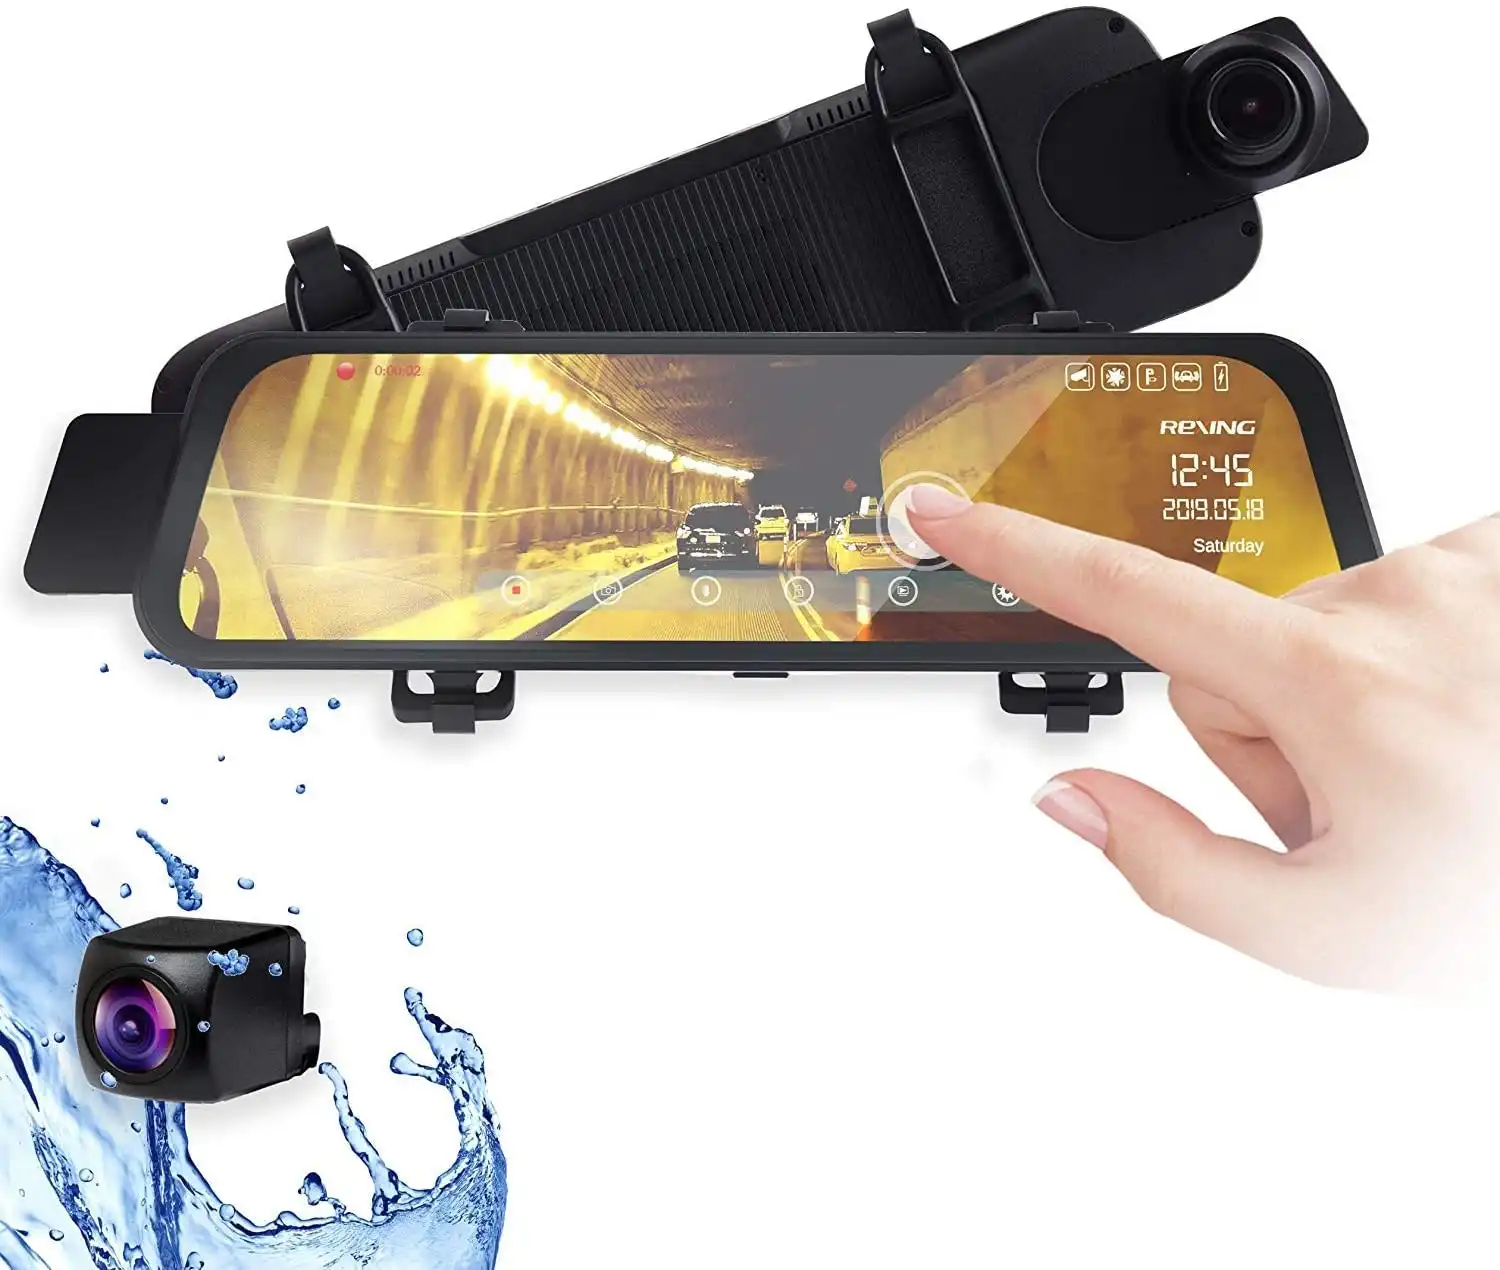 AUTO-VOX V5Pro OEM Look Rear View Mirror Camera with Neat Wiring, 9.35'' No Glare Full Laminated Ultrathin Touch Screen Mirror Dash Cam , Dual 1080p